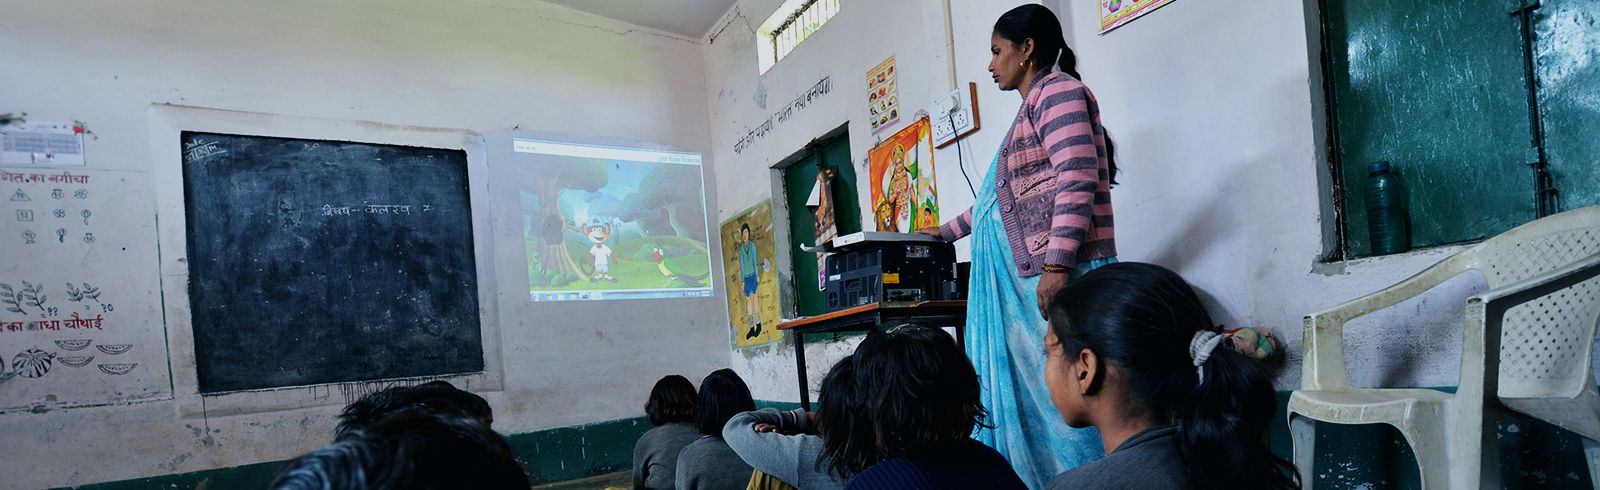 Learning In Rural Classrooms